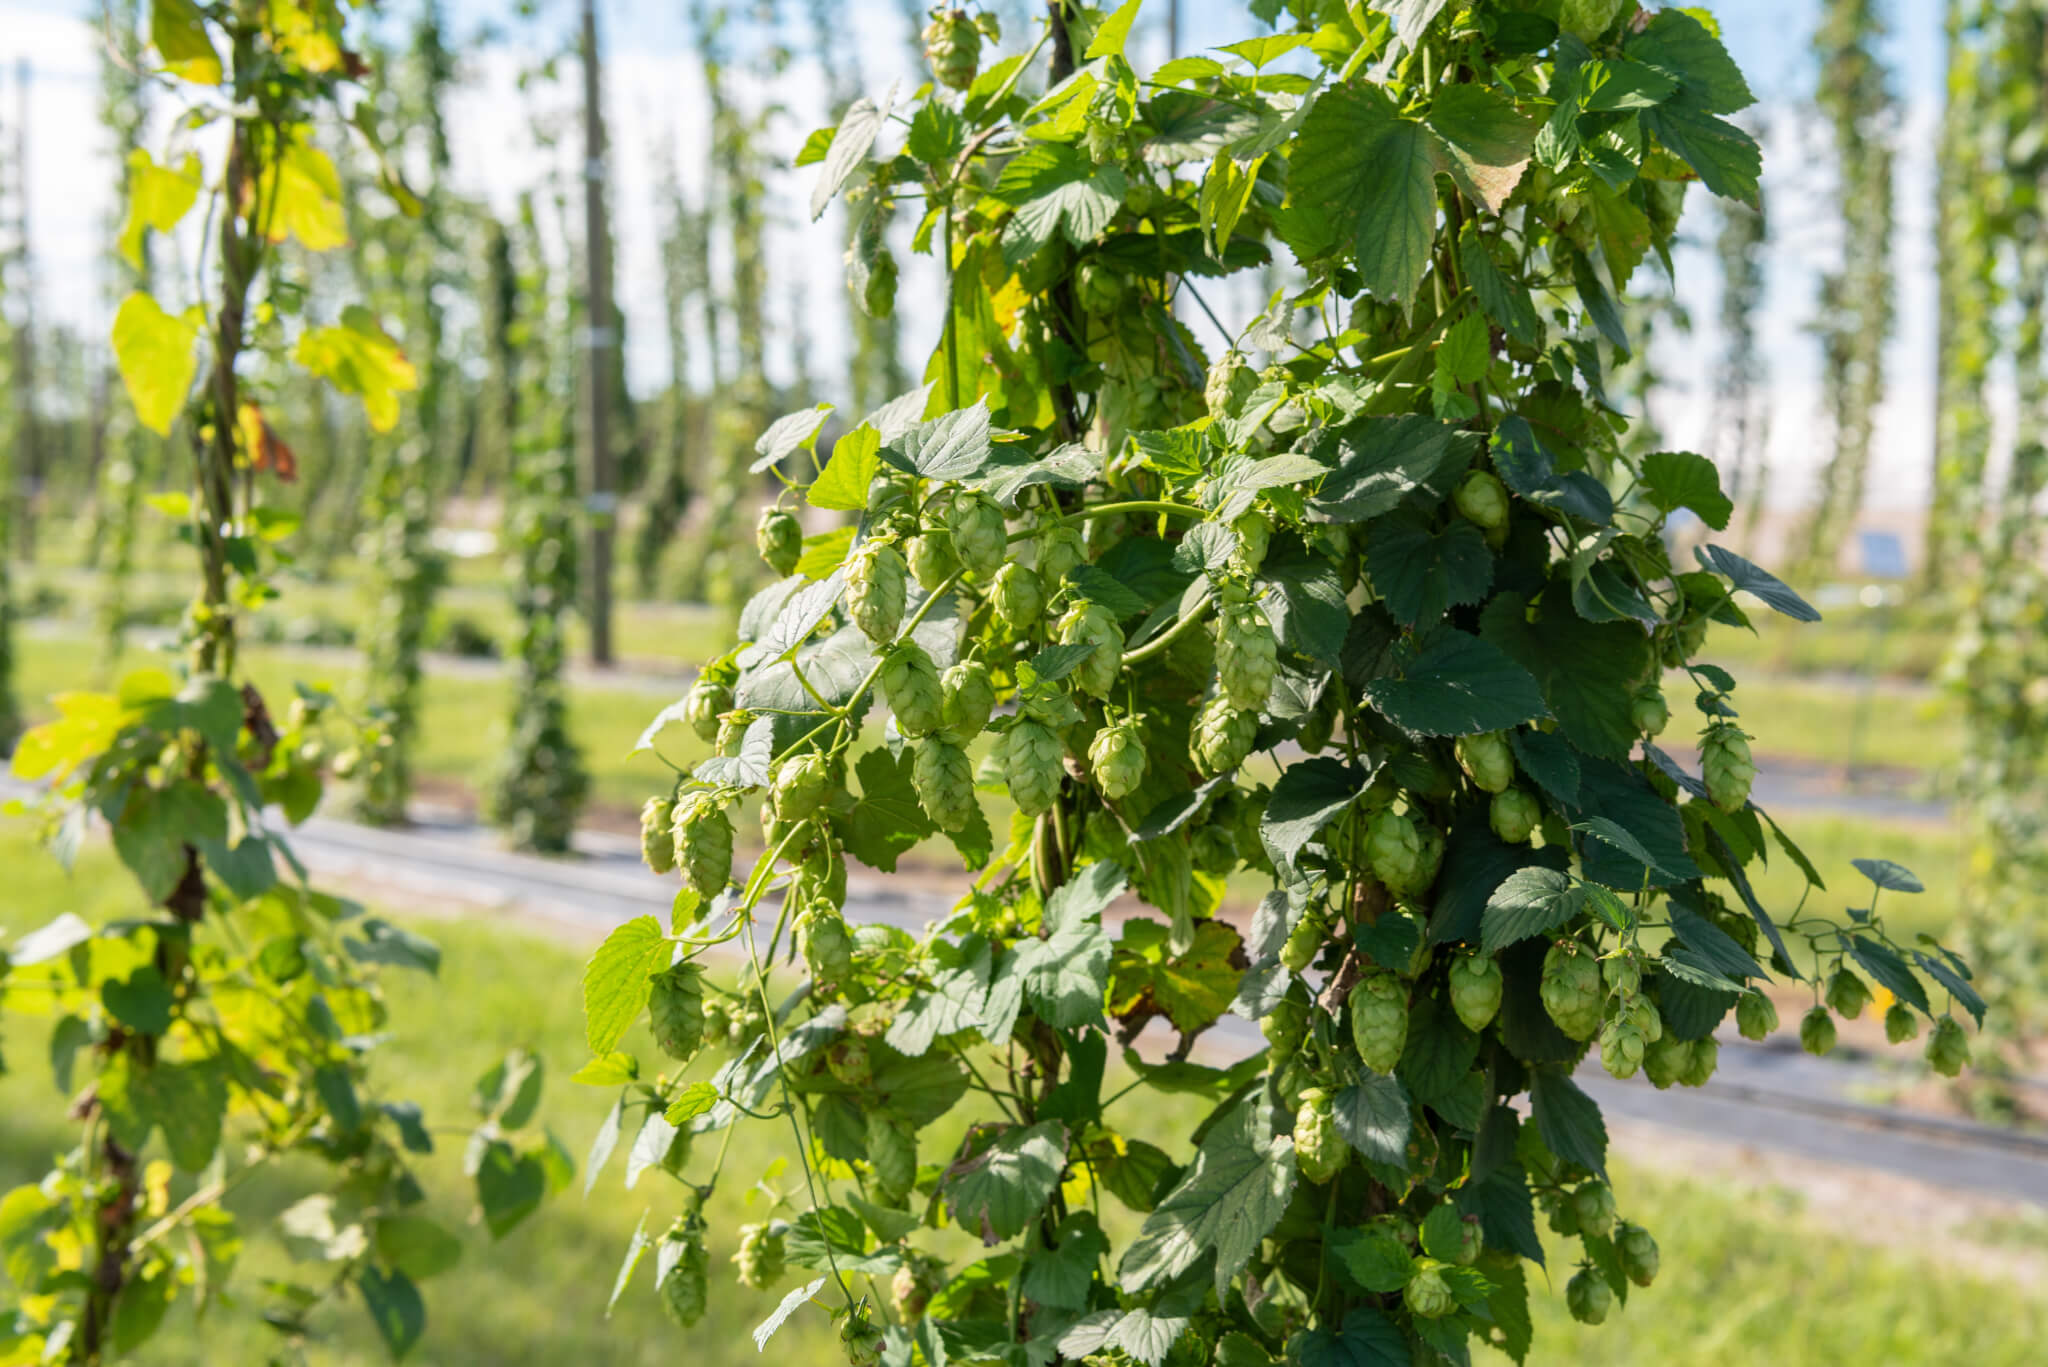 Hops growing on the vine at a hop farm in Florida.